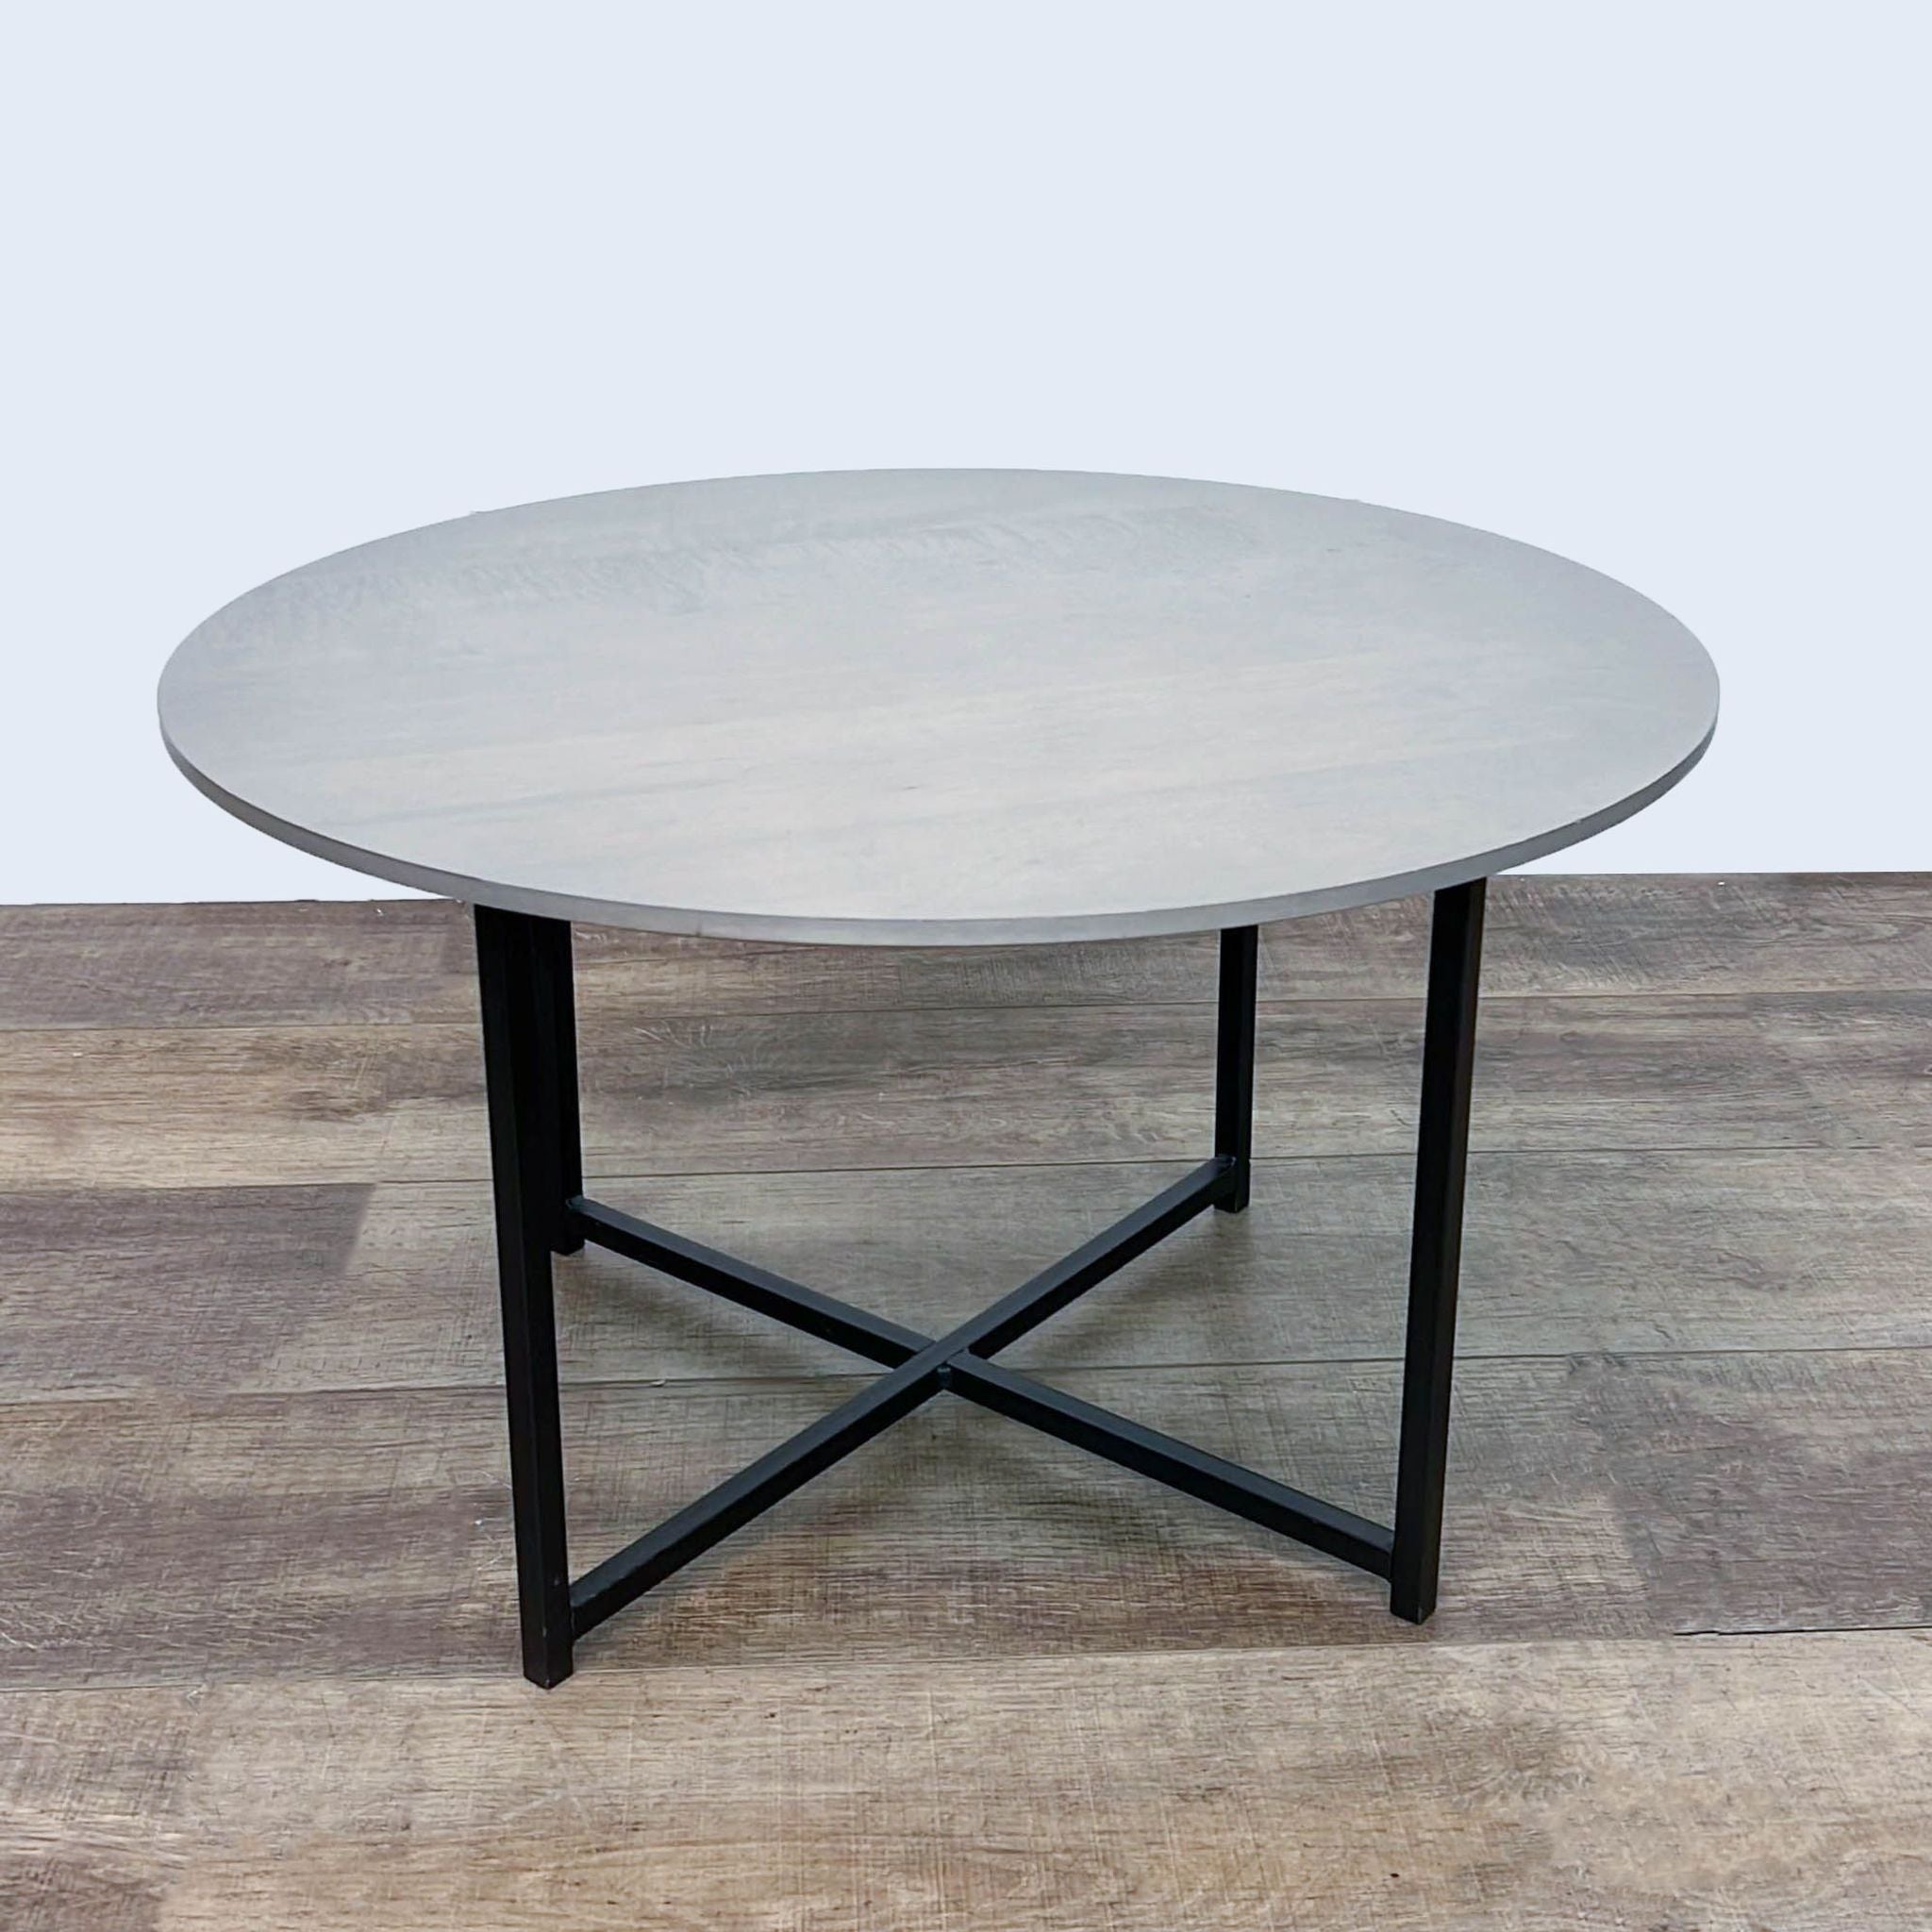 Round coffee table by Room & Board with maple top in shell stain and X-shaped natural steel base on a wooden floor.